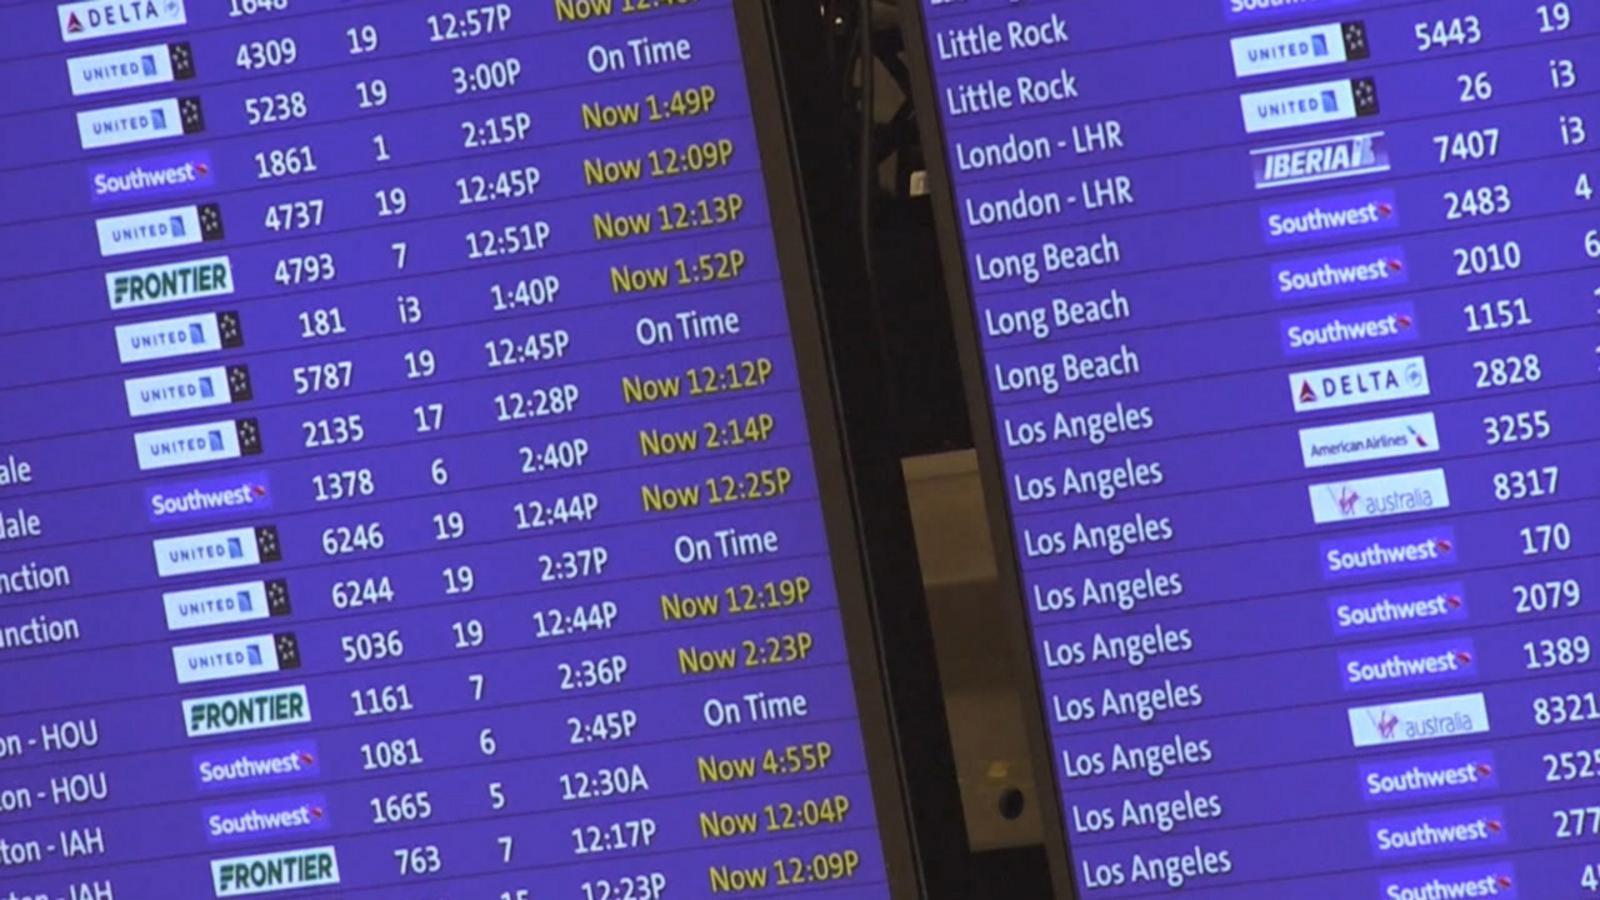 VIDEO: Airports brace for busiest Thanksgiving travel days on record